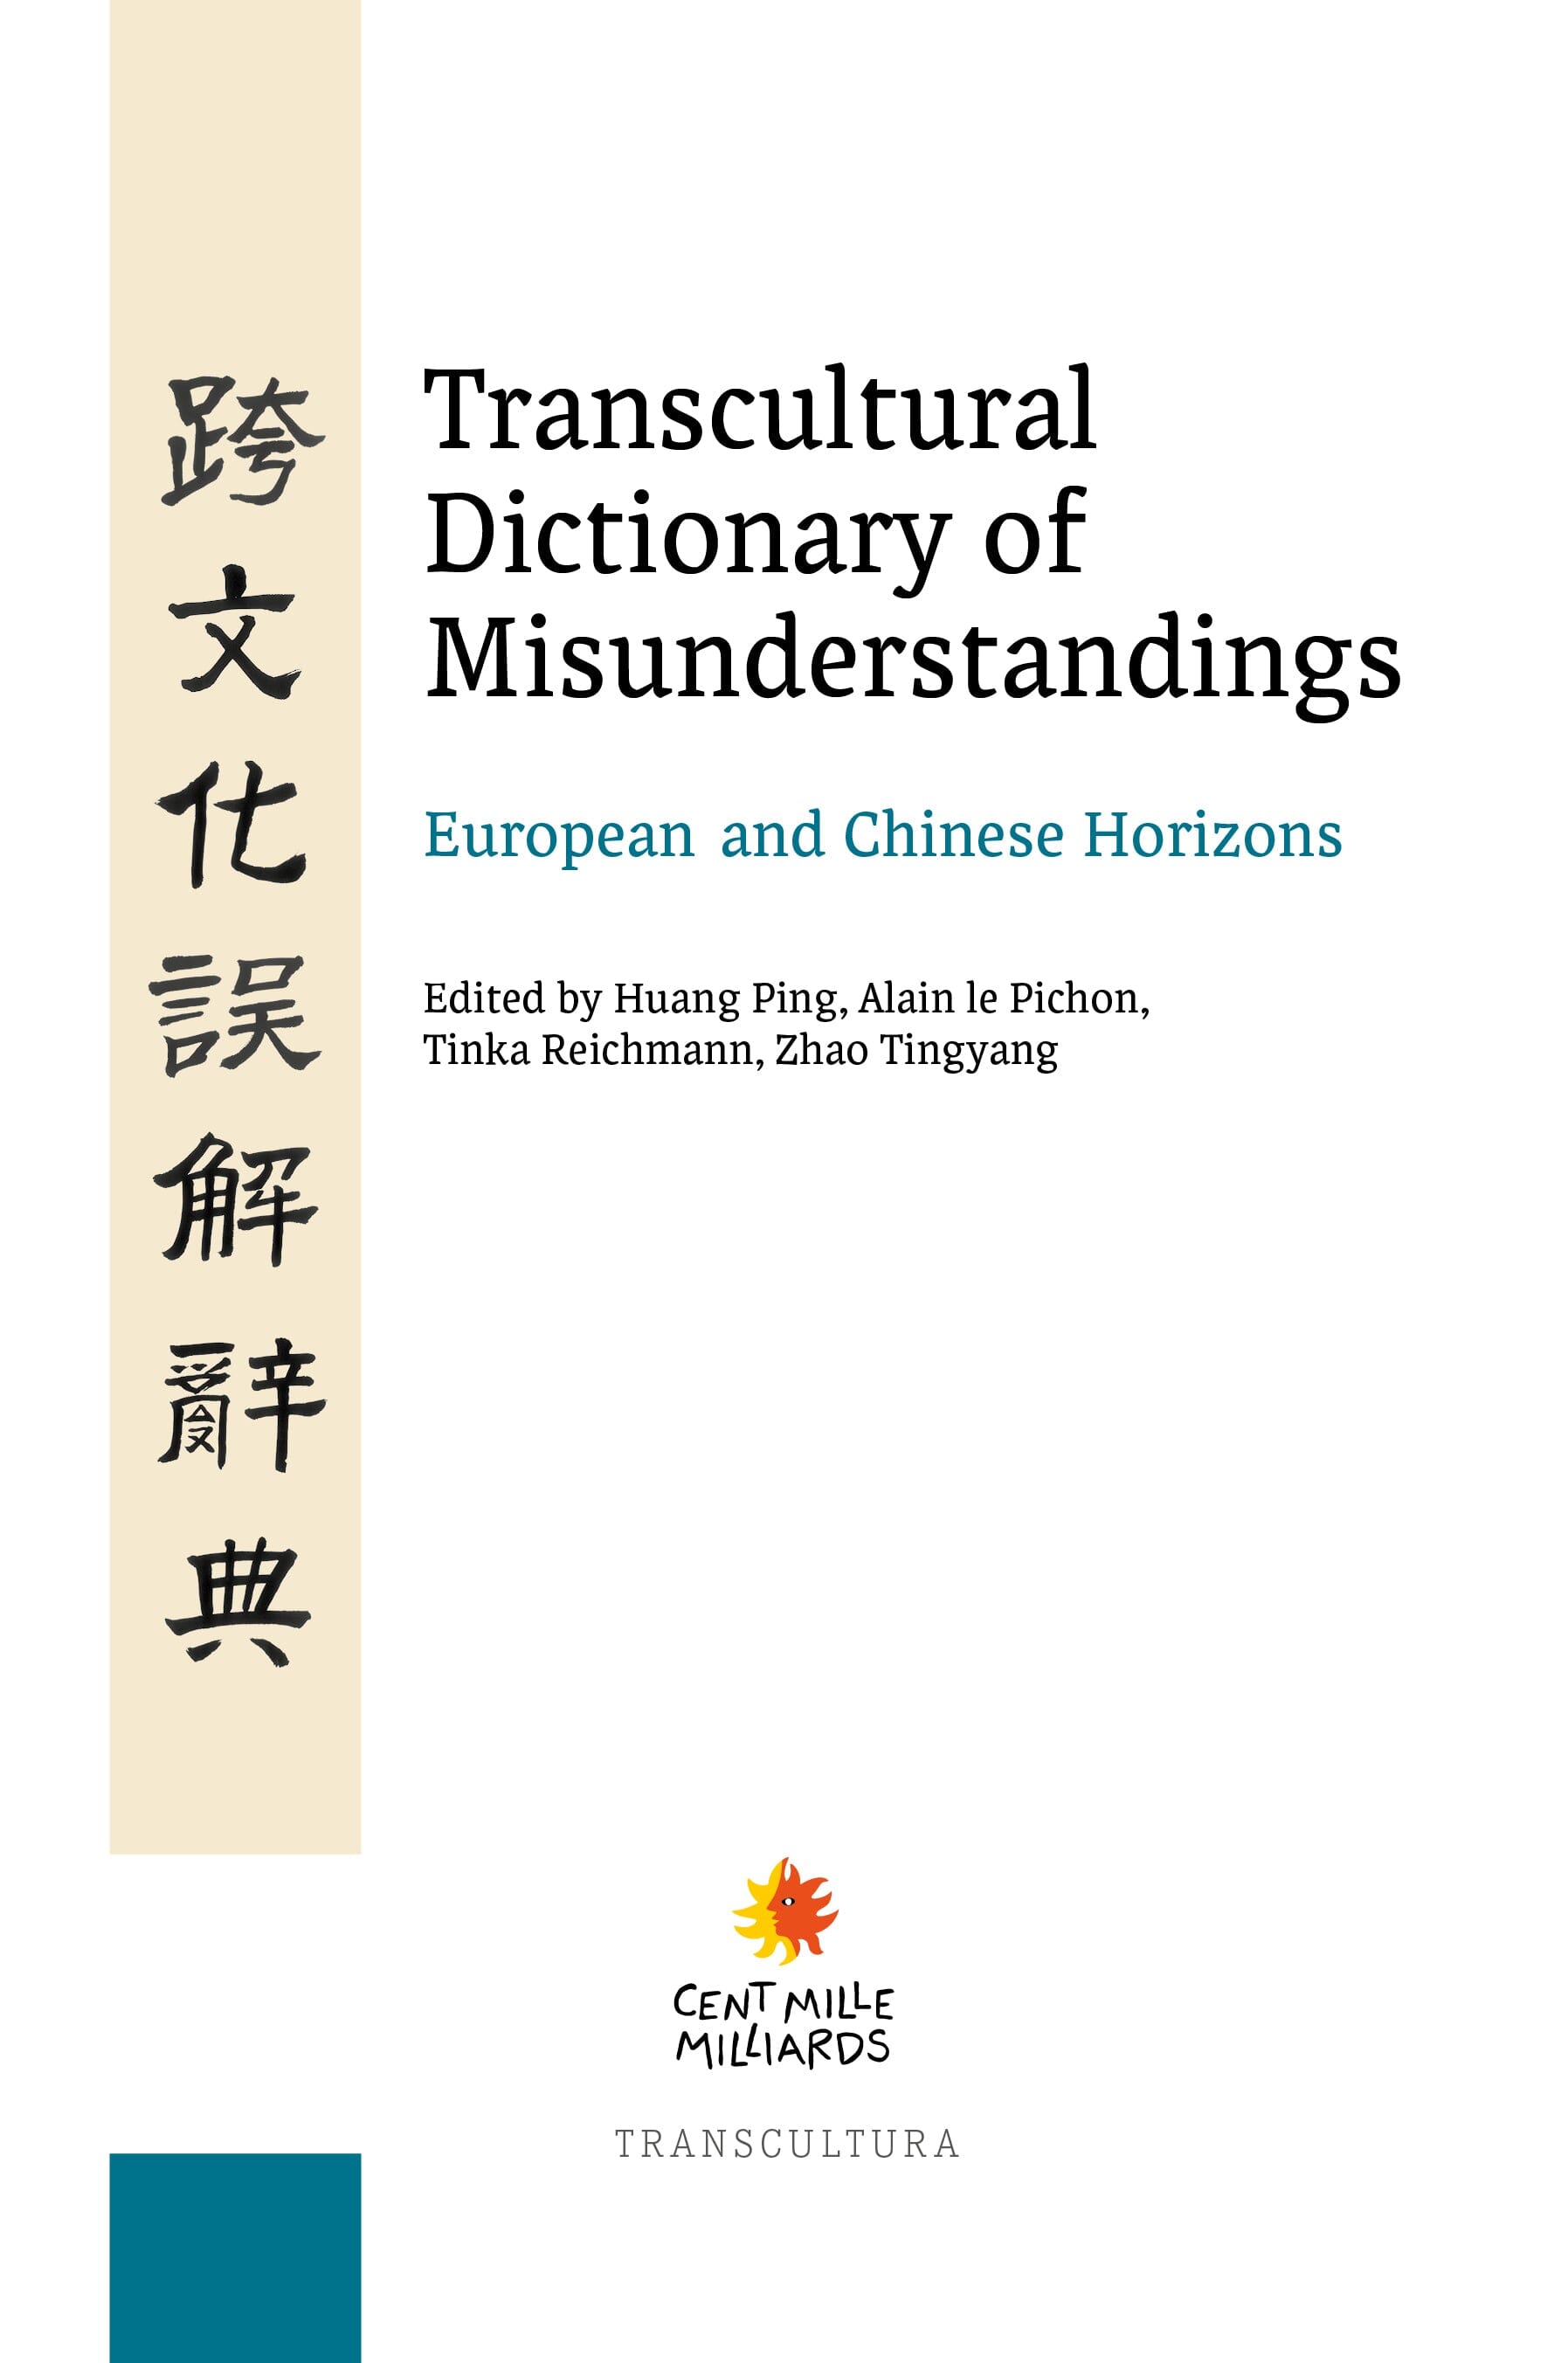 Transcultural Dictionary of Misunderstandings